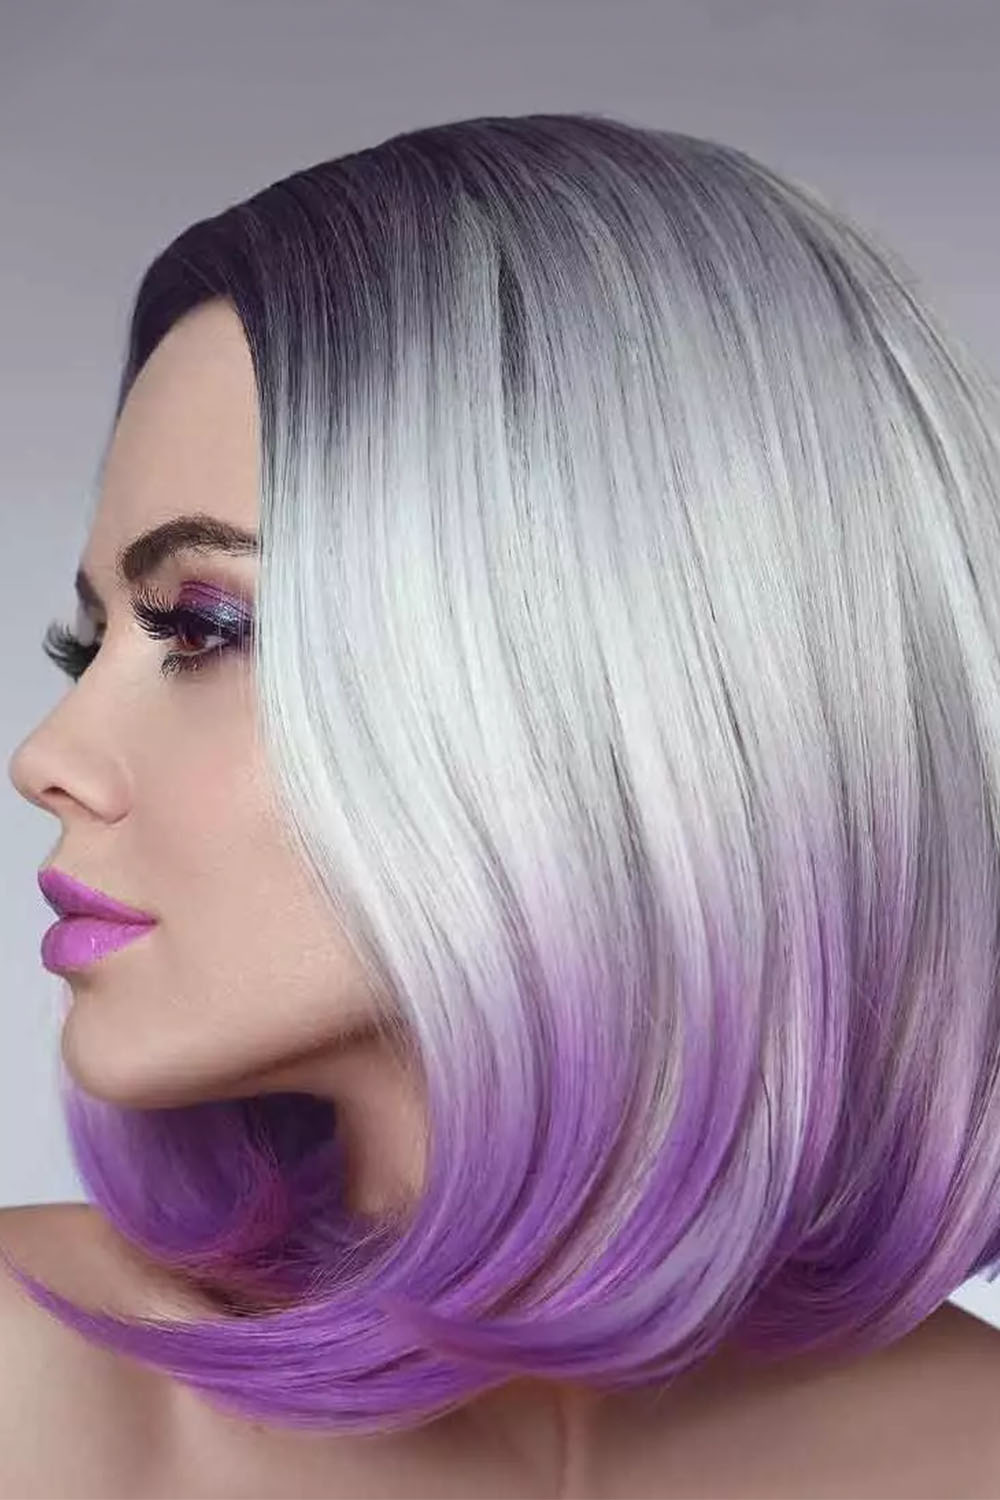 Icy Blonde Hair With Violet Ends